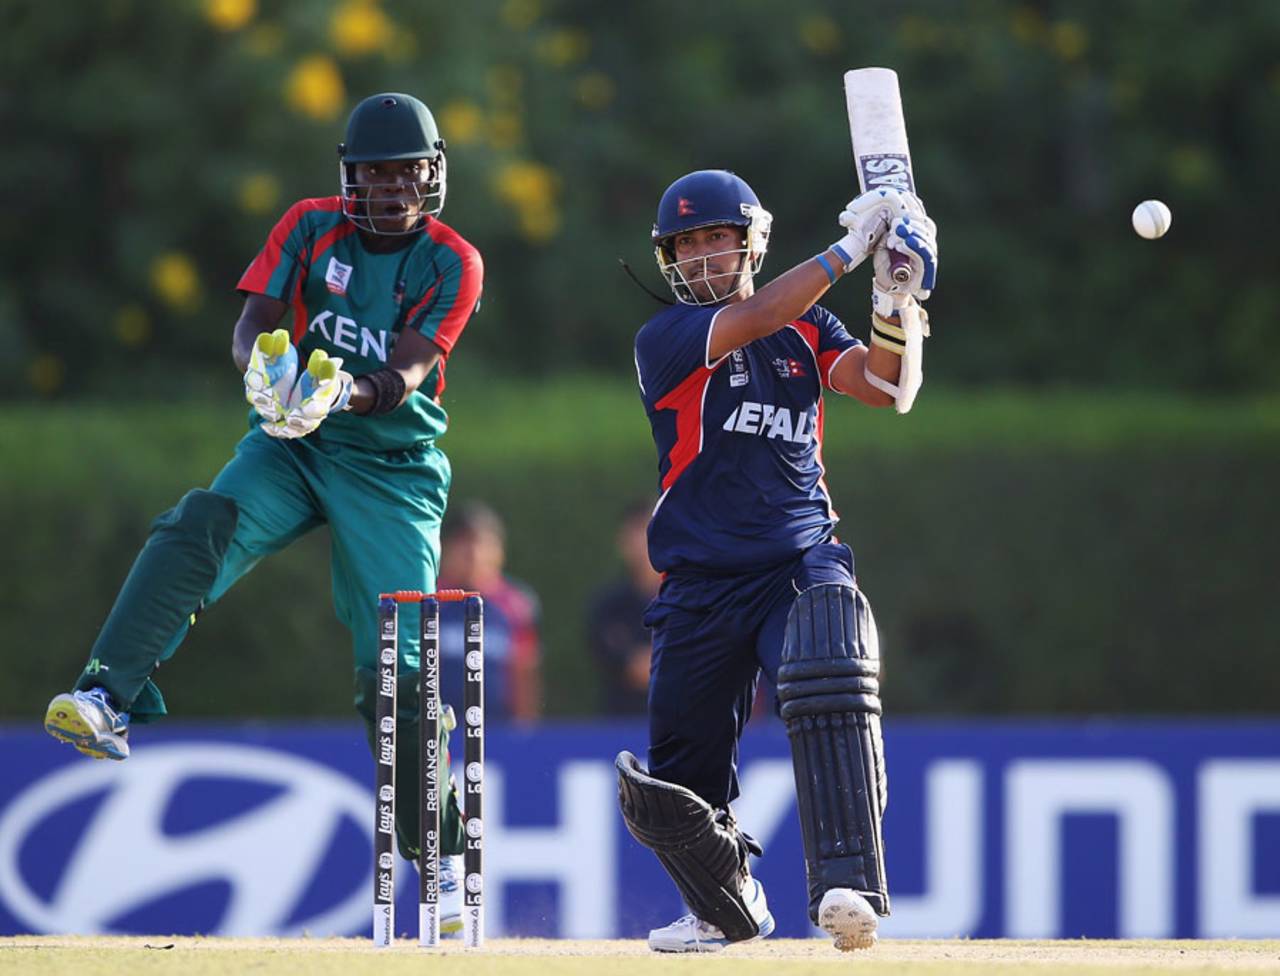 Nepal are looking to overthrow teams like Canada and Kenya in the ICC's High Performance Programme, and ultimately get ODI status&nbsp;&nbsp;&bull;&nbsp;&nbsp;ICC/Getty